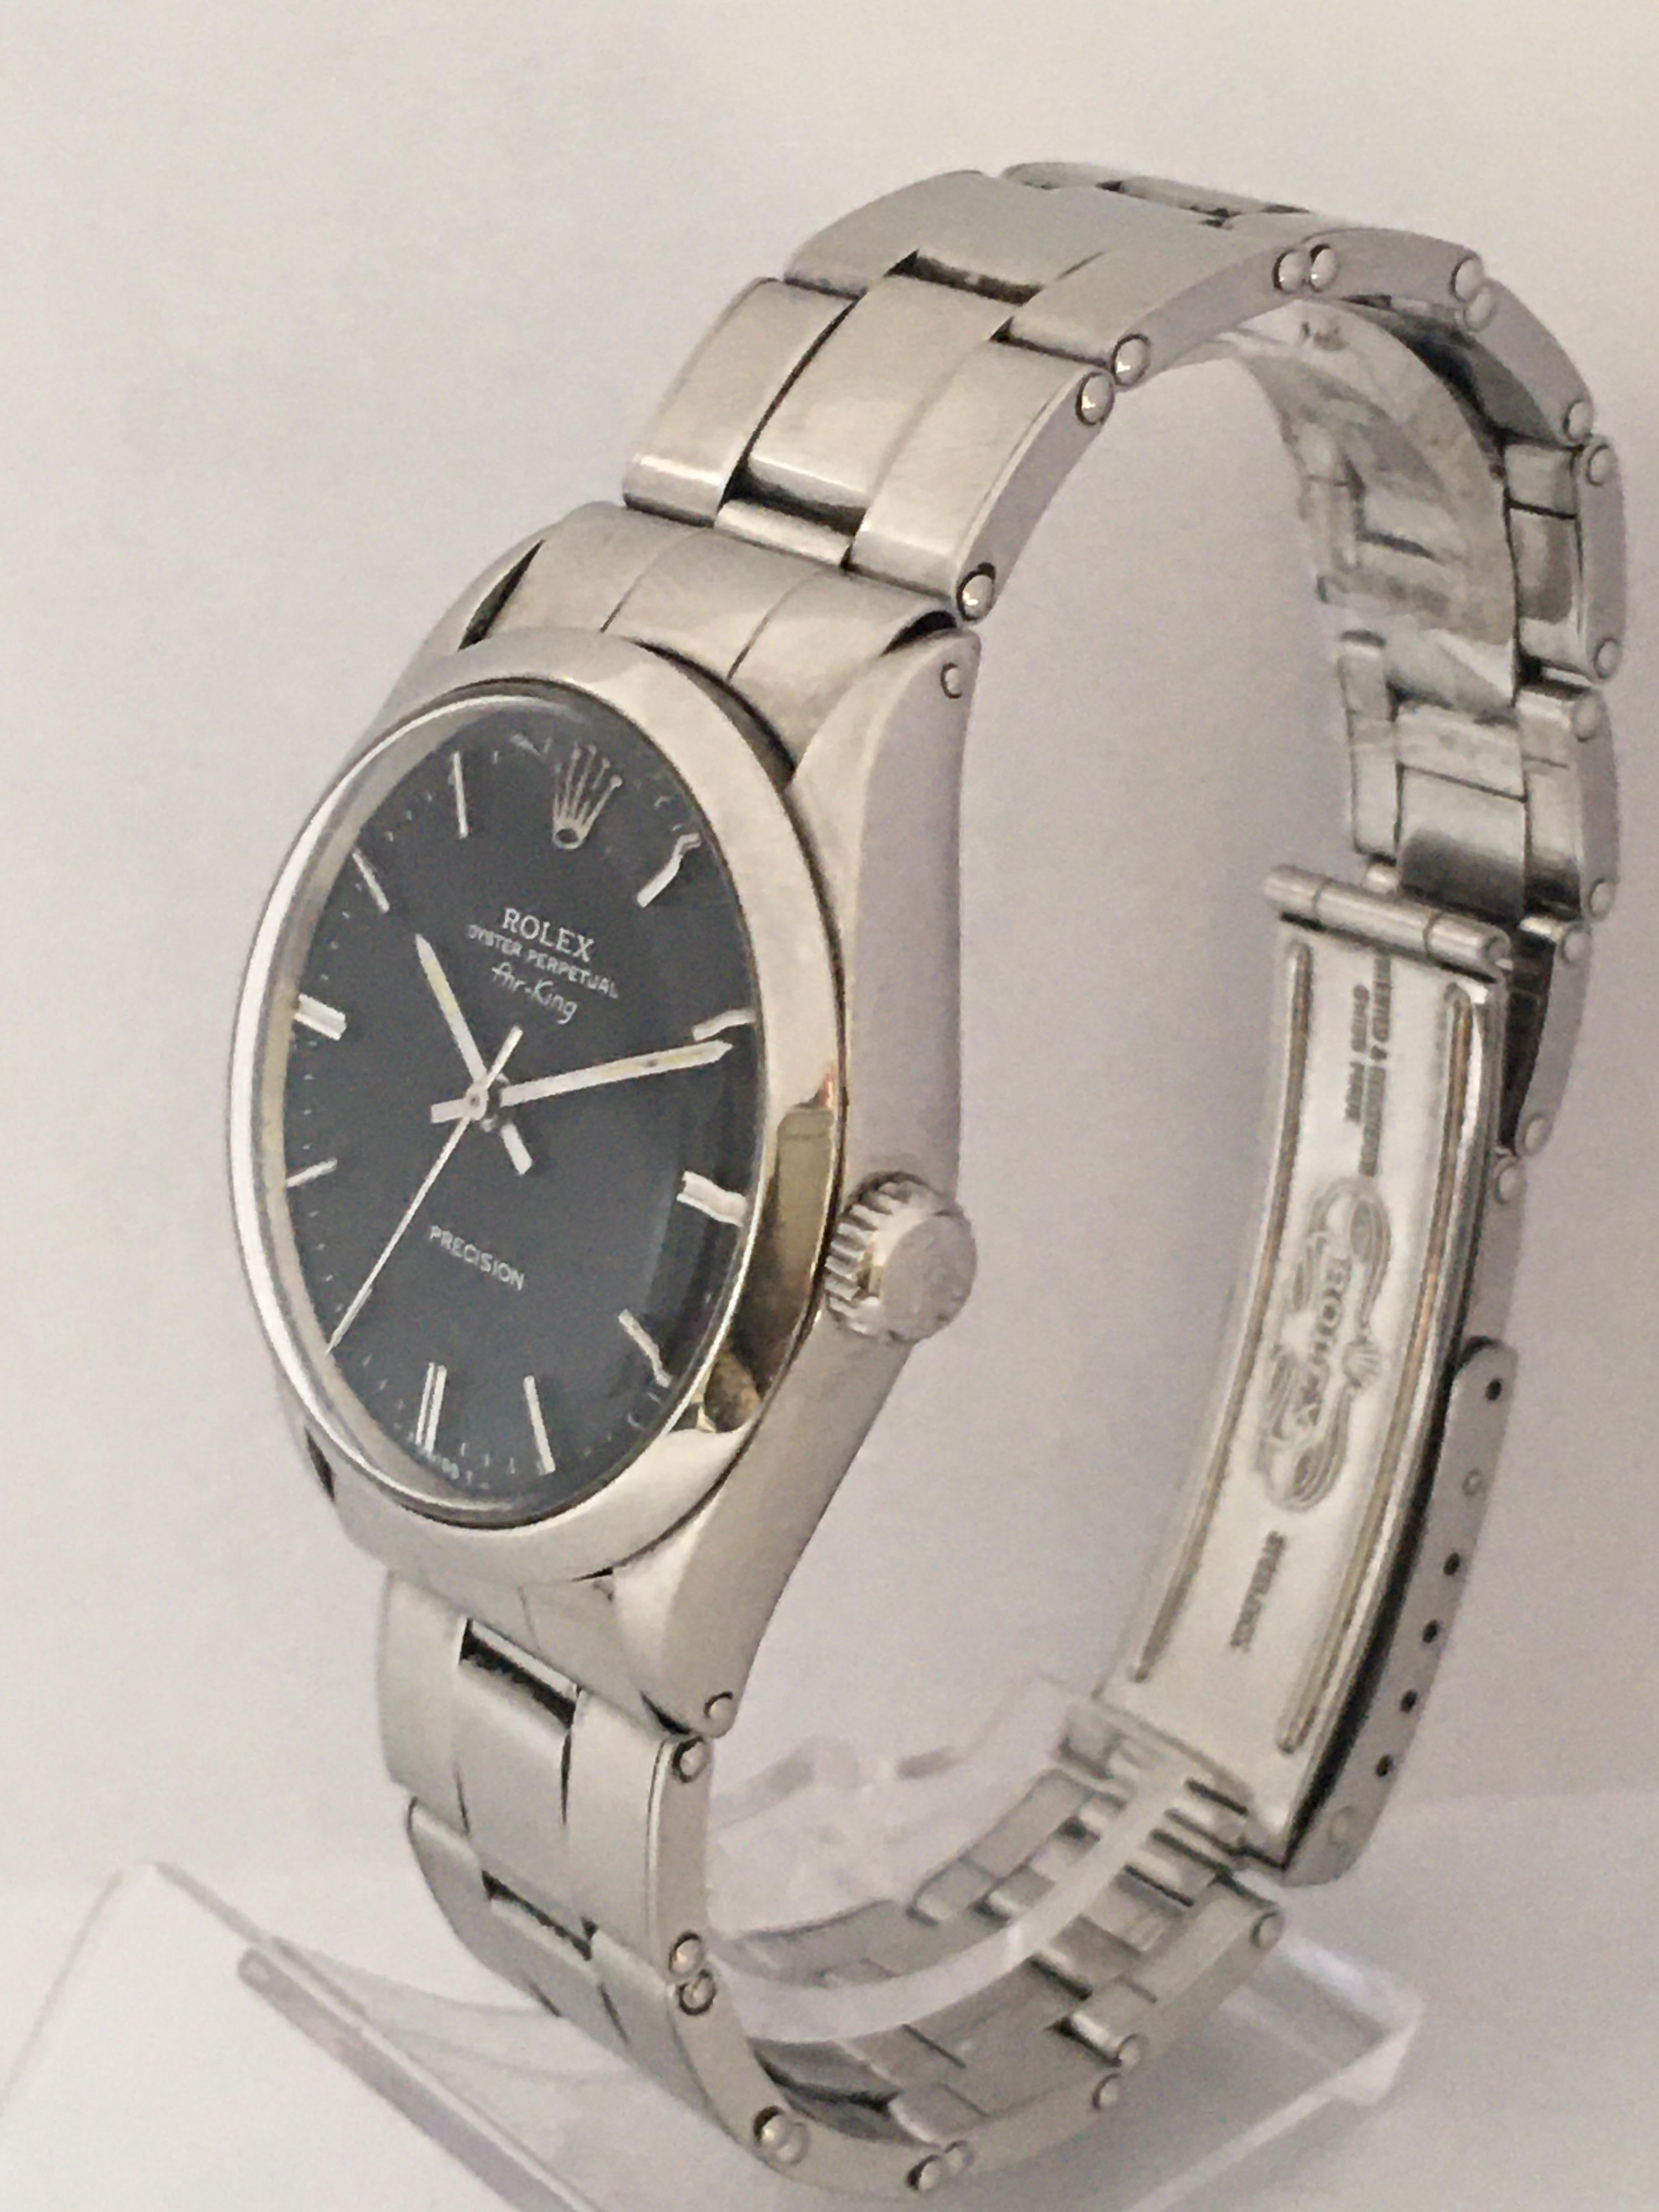 rolex oyster perpetual air king precision